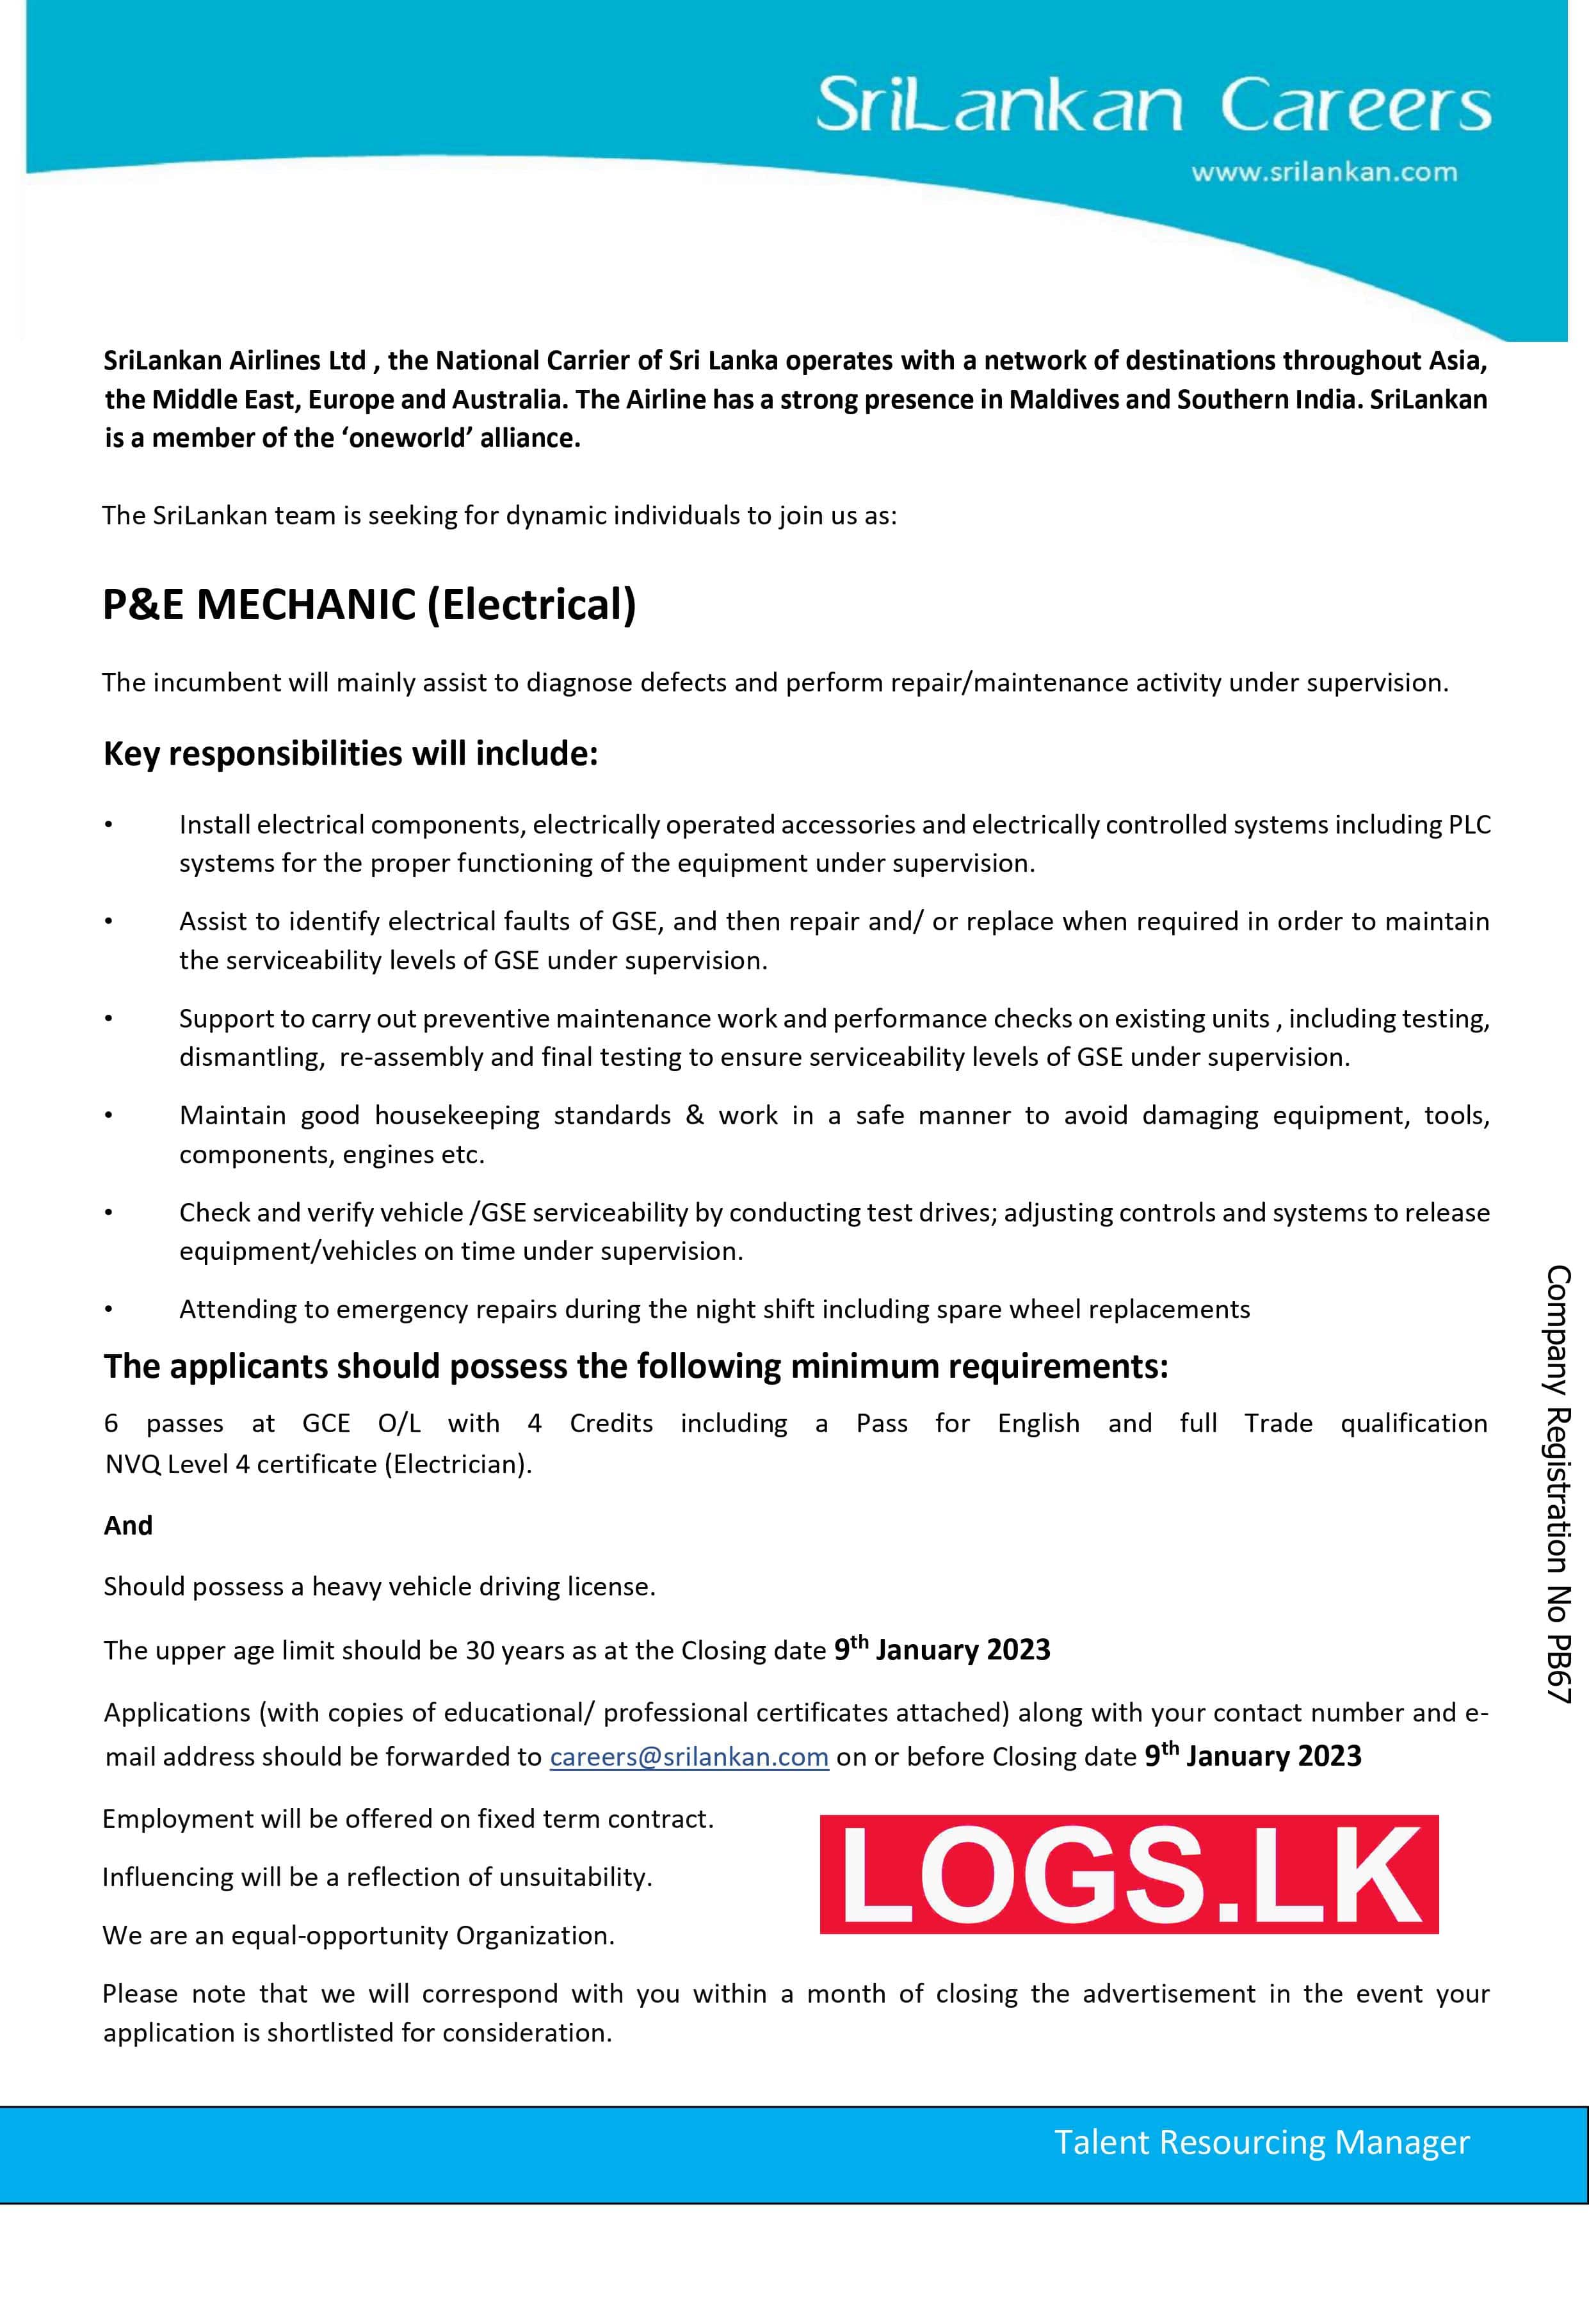 P&E Mechanic (Electrical) - Sri Lankan Airlines Vacancies 2023 Application Form Download